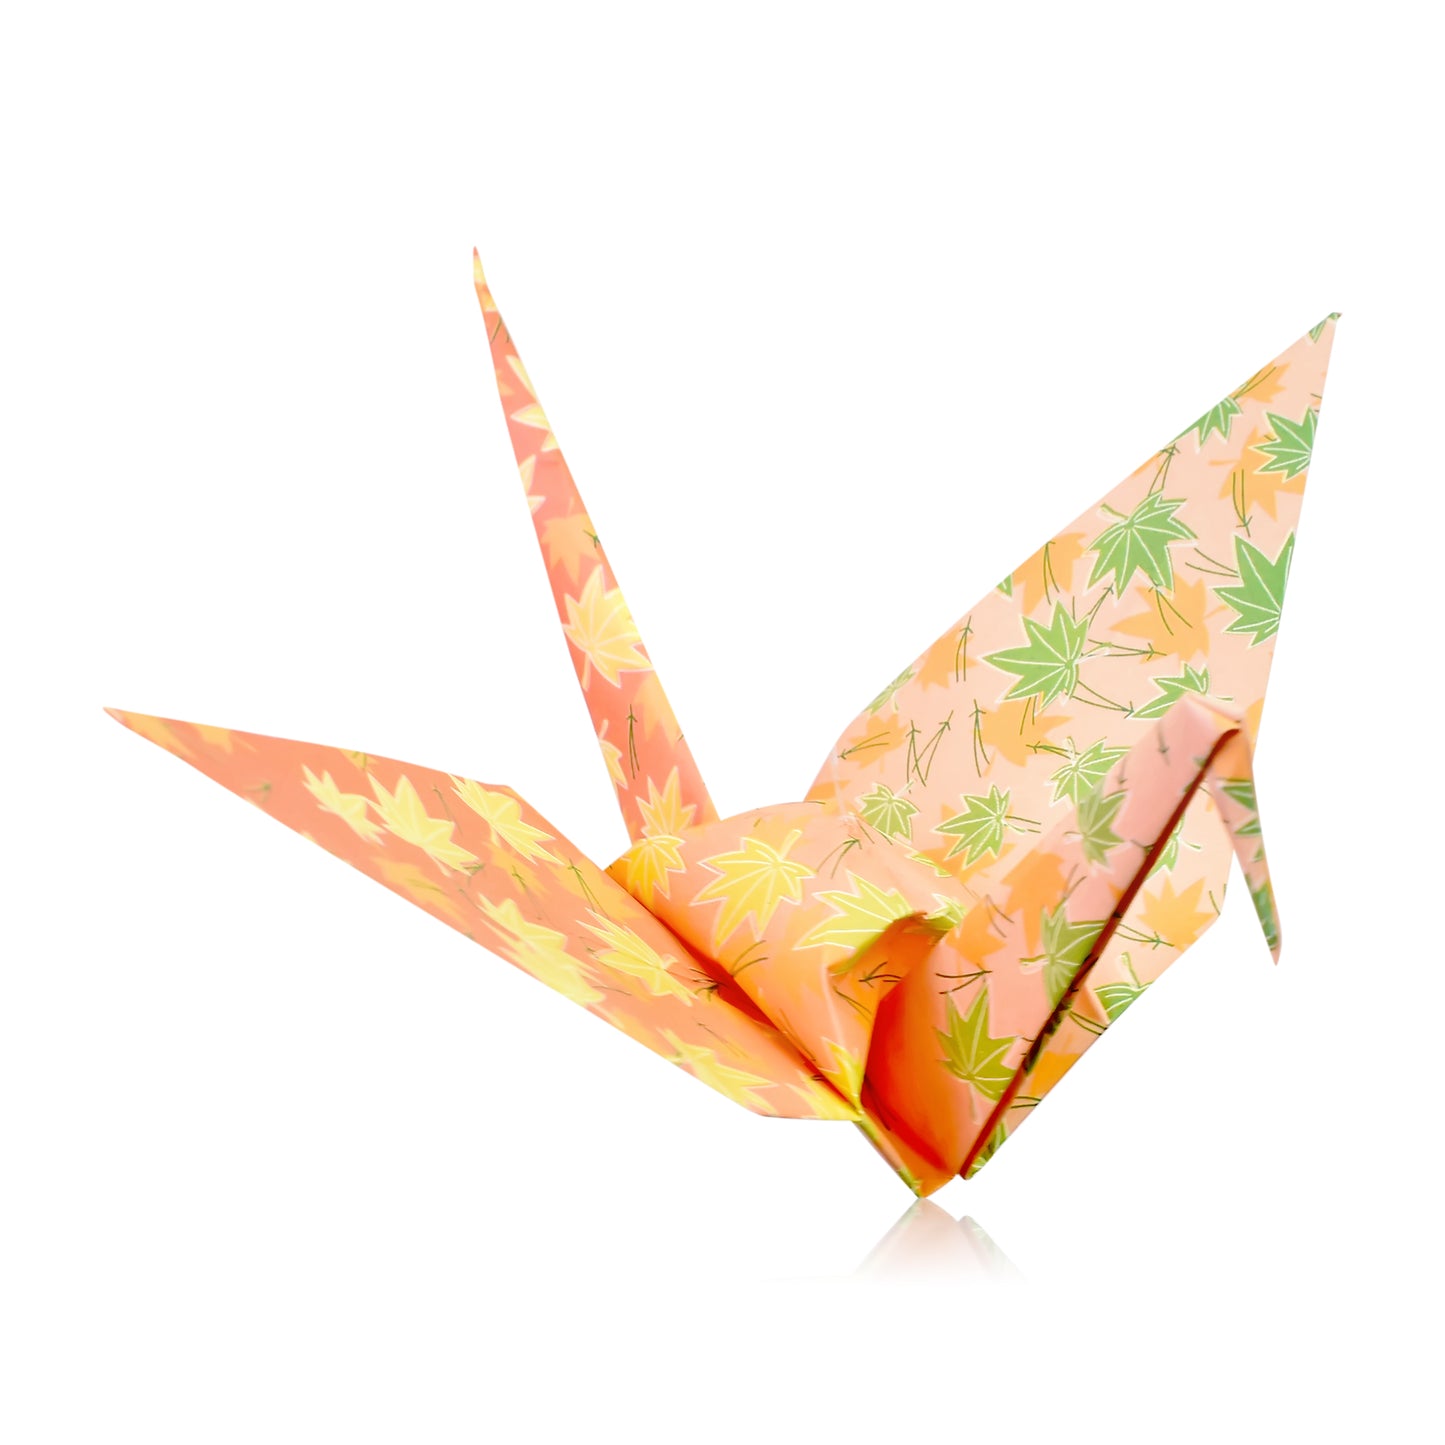 Give the Perfect Birthday Gift with Origami Cranes: November Birthstone